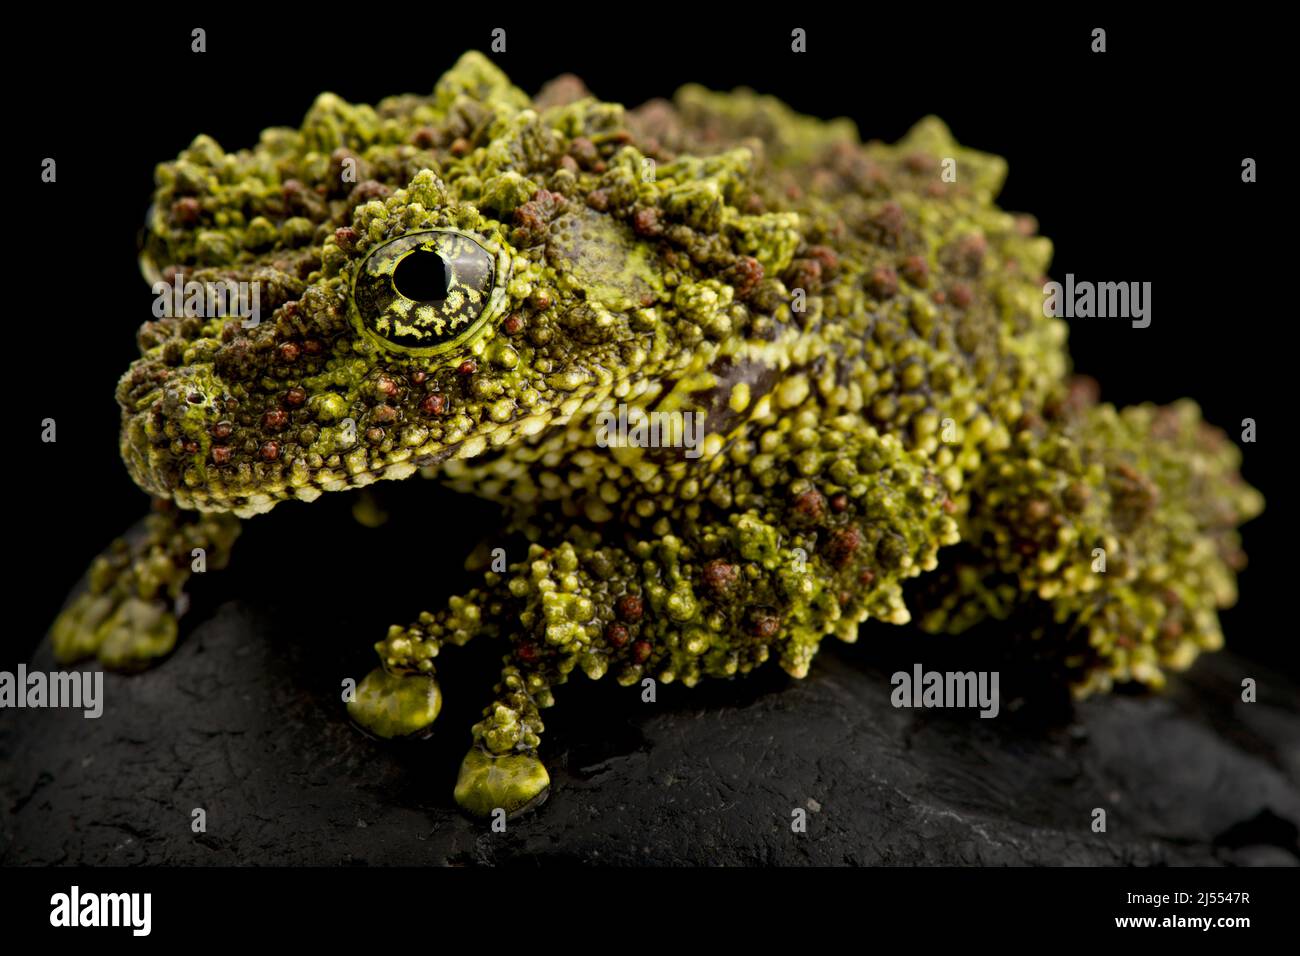 Vietnamese Mossy Frog (Theloderma corticale) Stock Photo